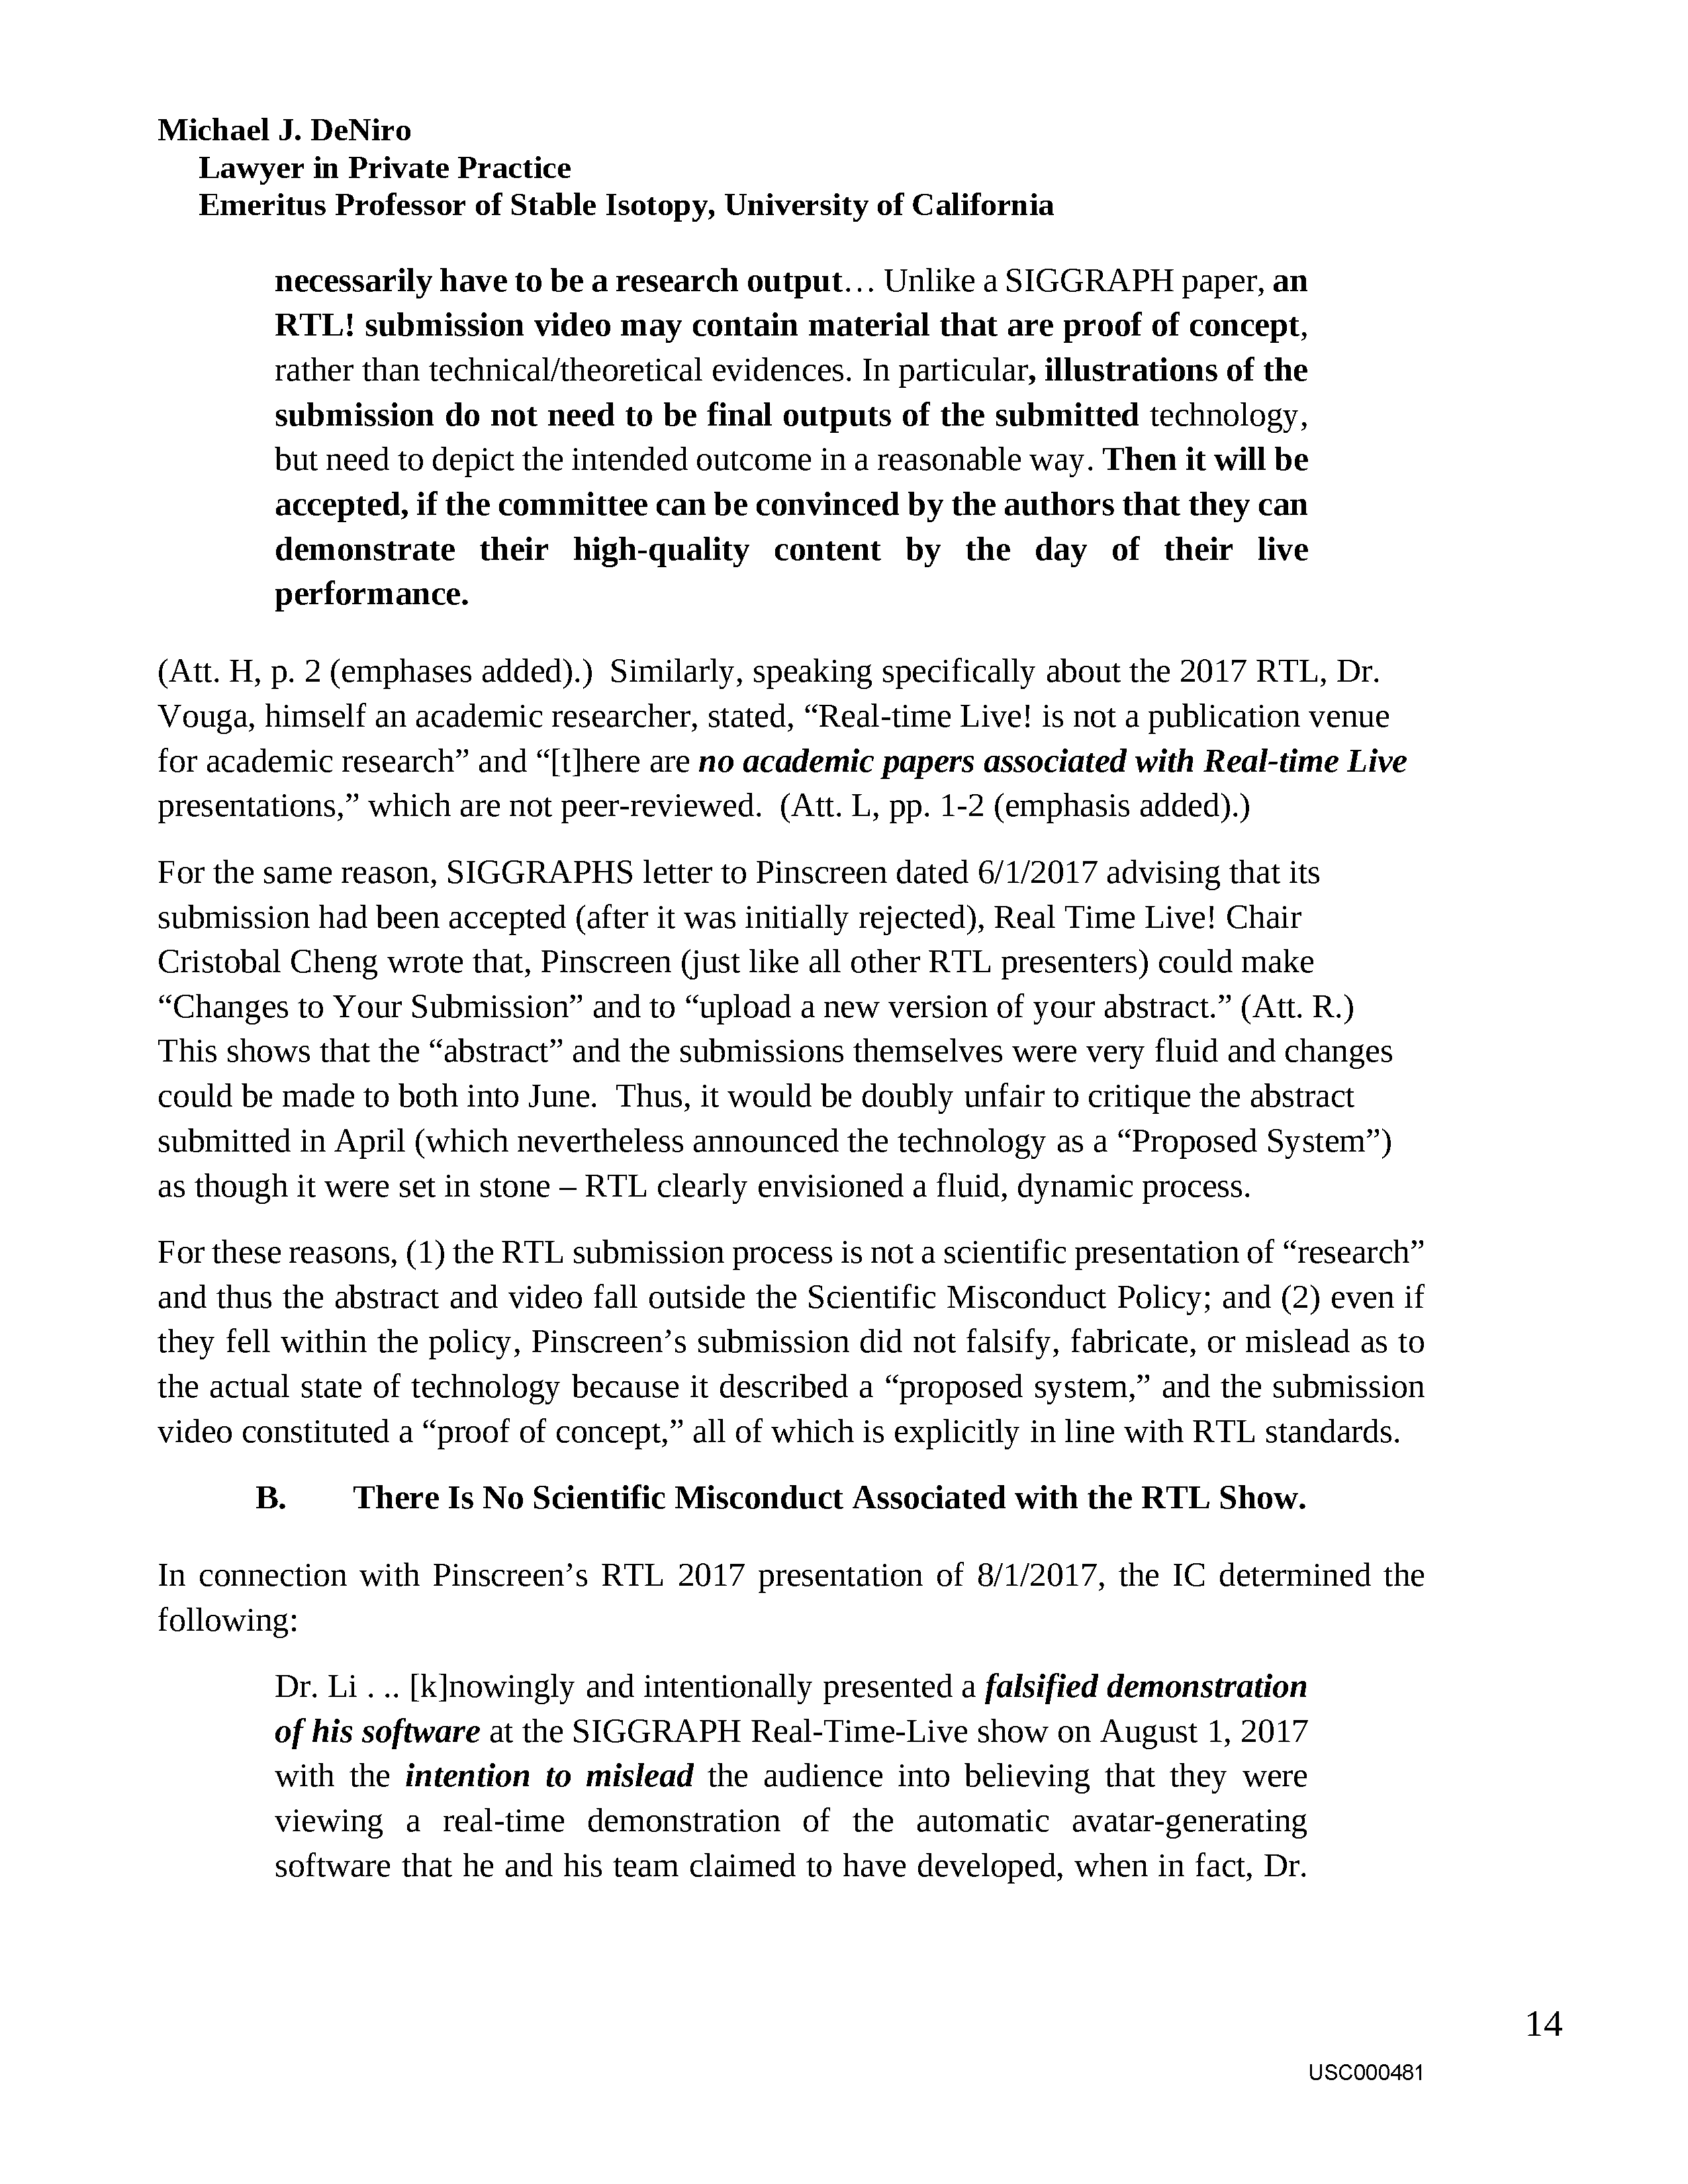 USC's Investigation Report re Hao Li's and Pinscreen's Scientific Misconduct at ACM SIGGRAPH RTL 2017 - Full Report Page 483